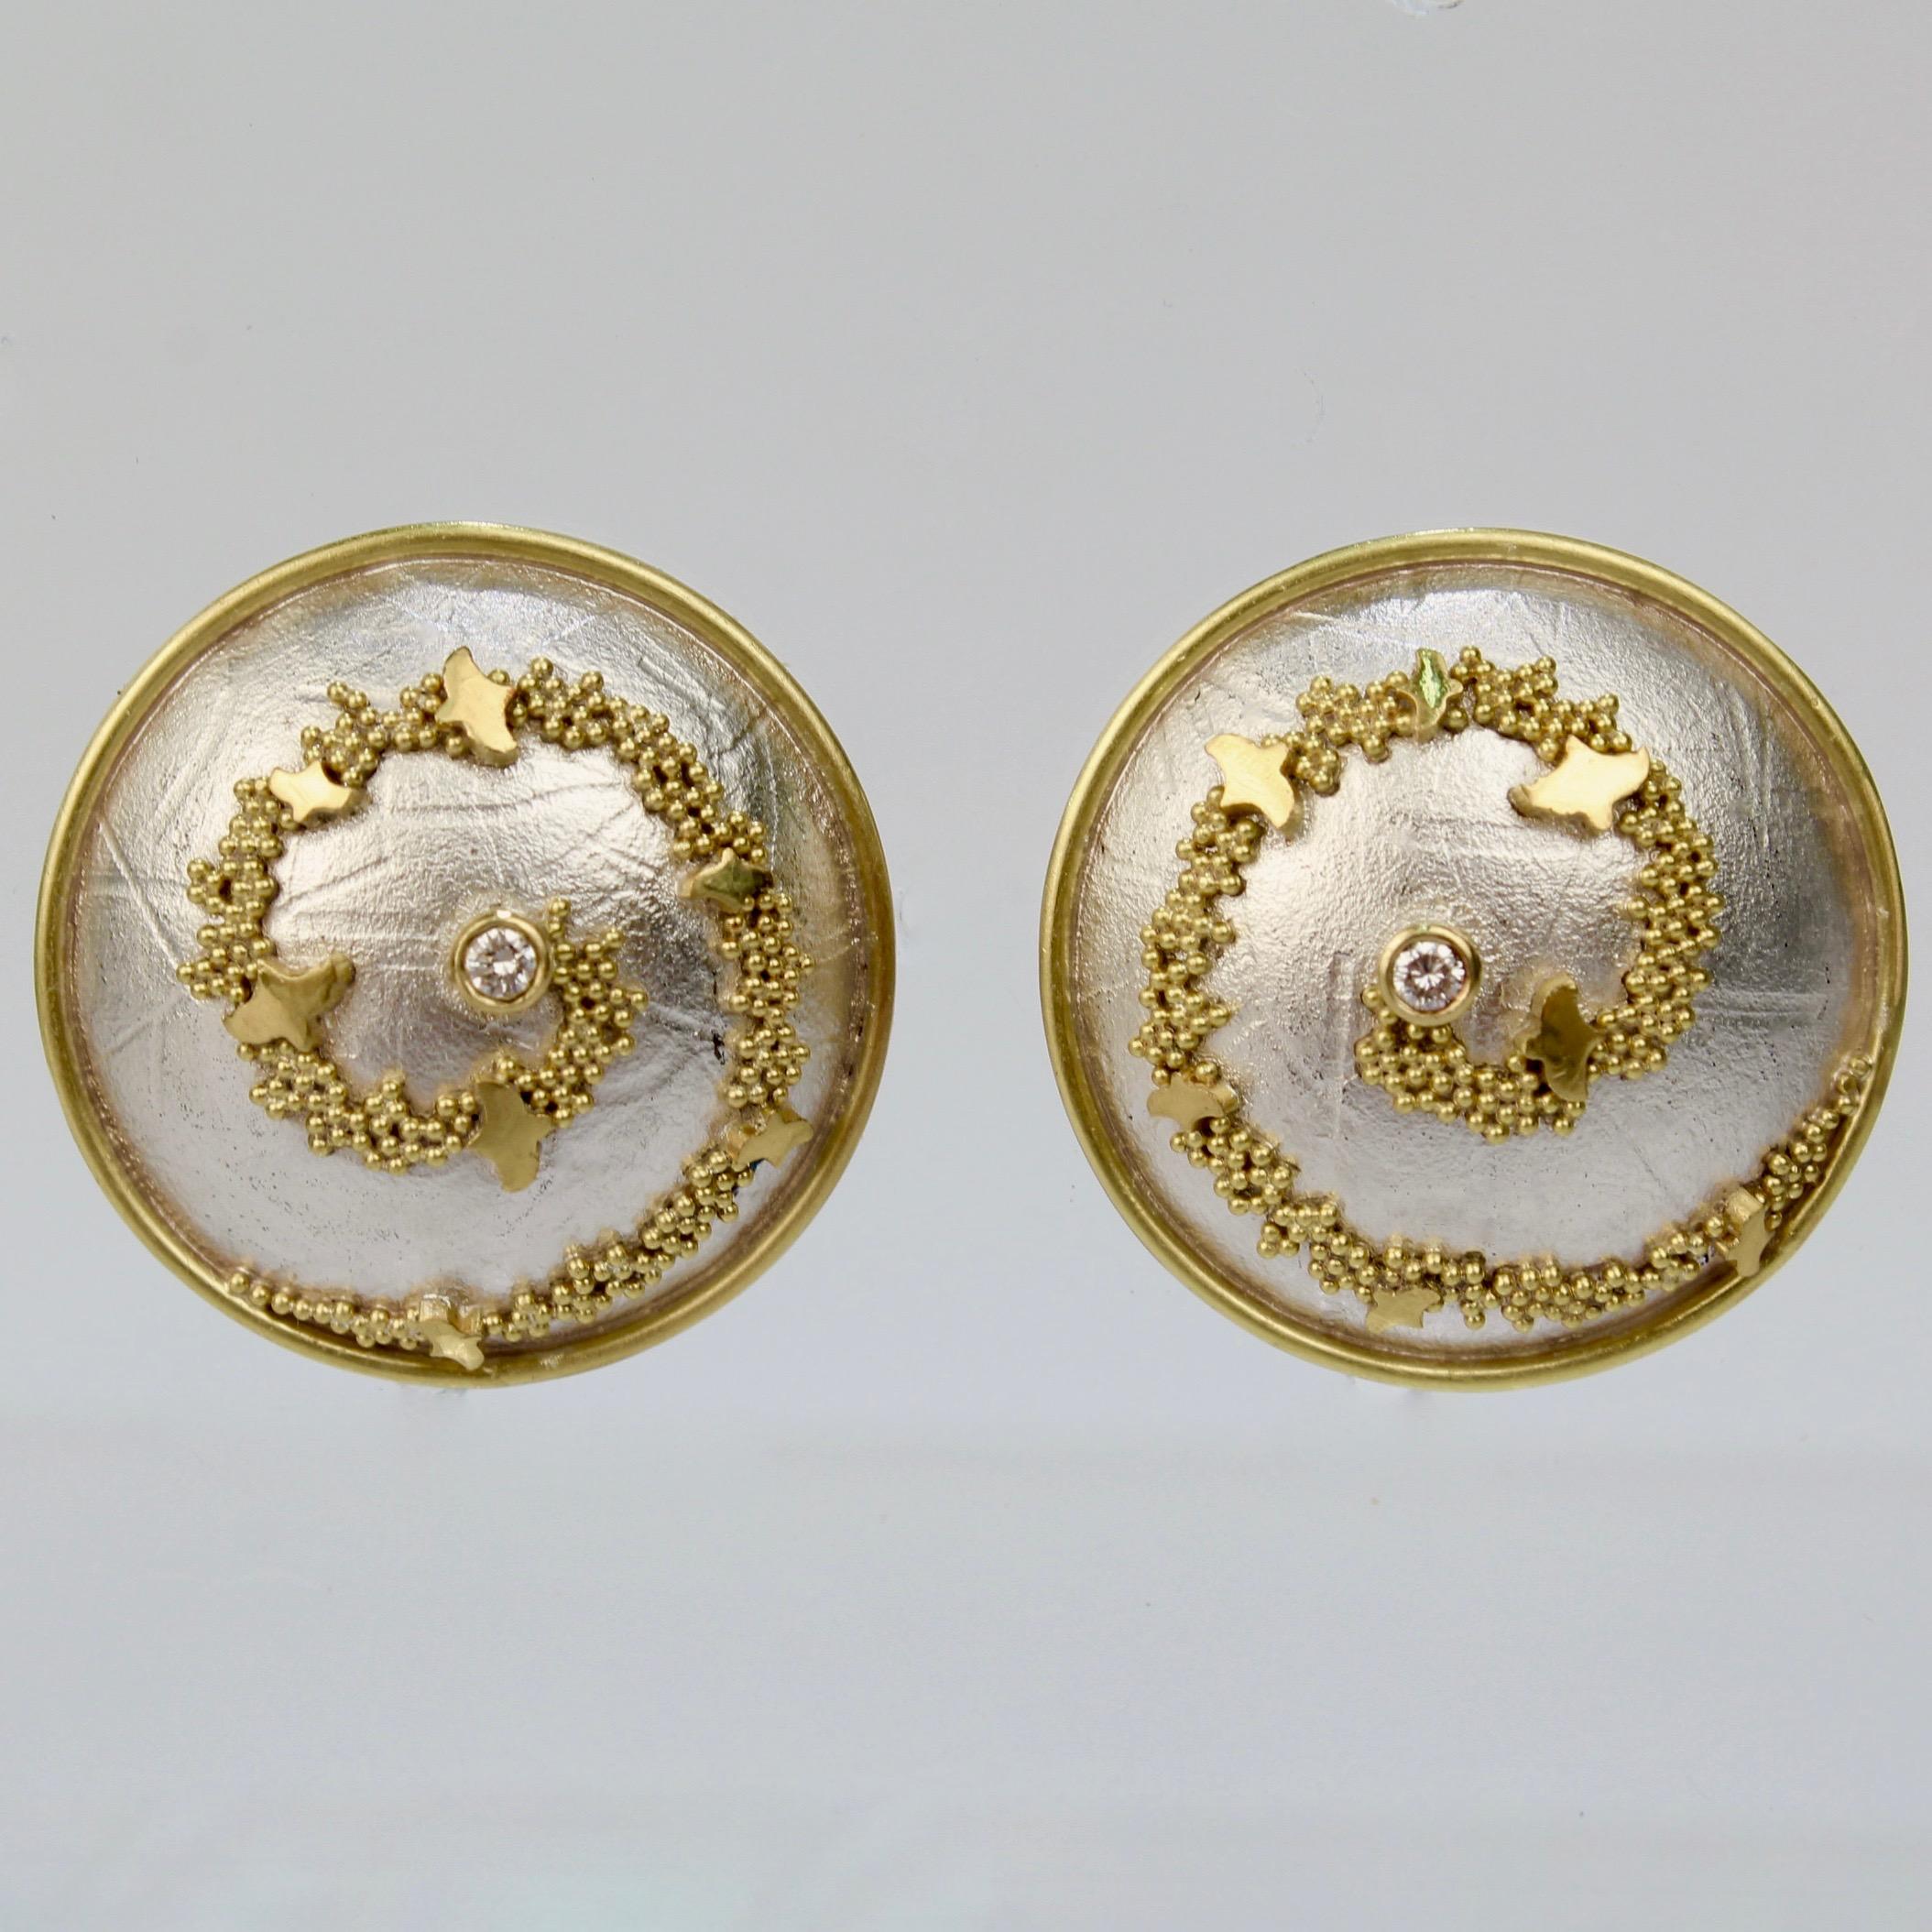 An elegant pair of Cornelia Goldsmith round earrings.

Each in sterling silver with a spiral of high-karat granulated gold beads and set with a small round white diamond.

Goldsmith is a renowned California contemporary jewelry maker and a member of